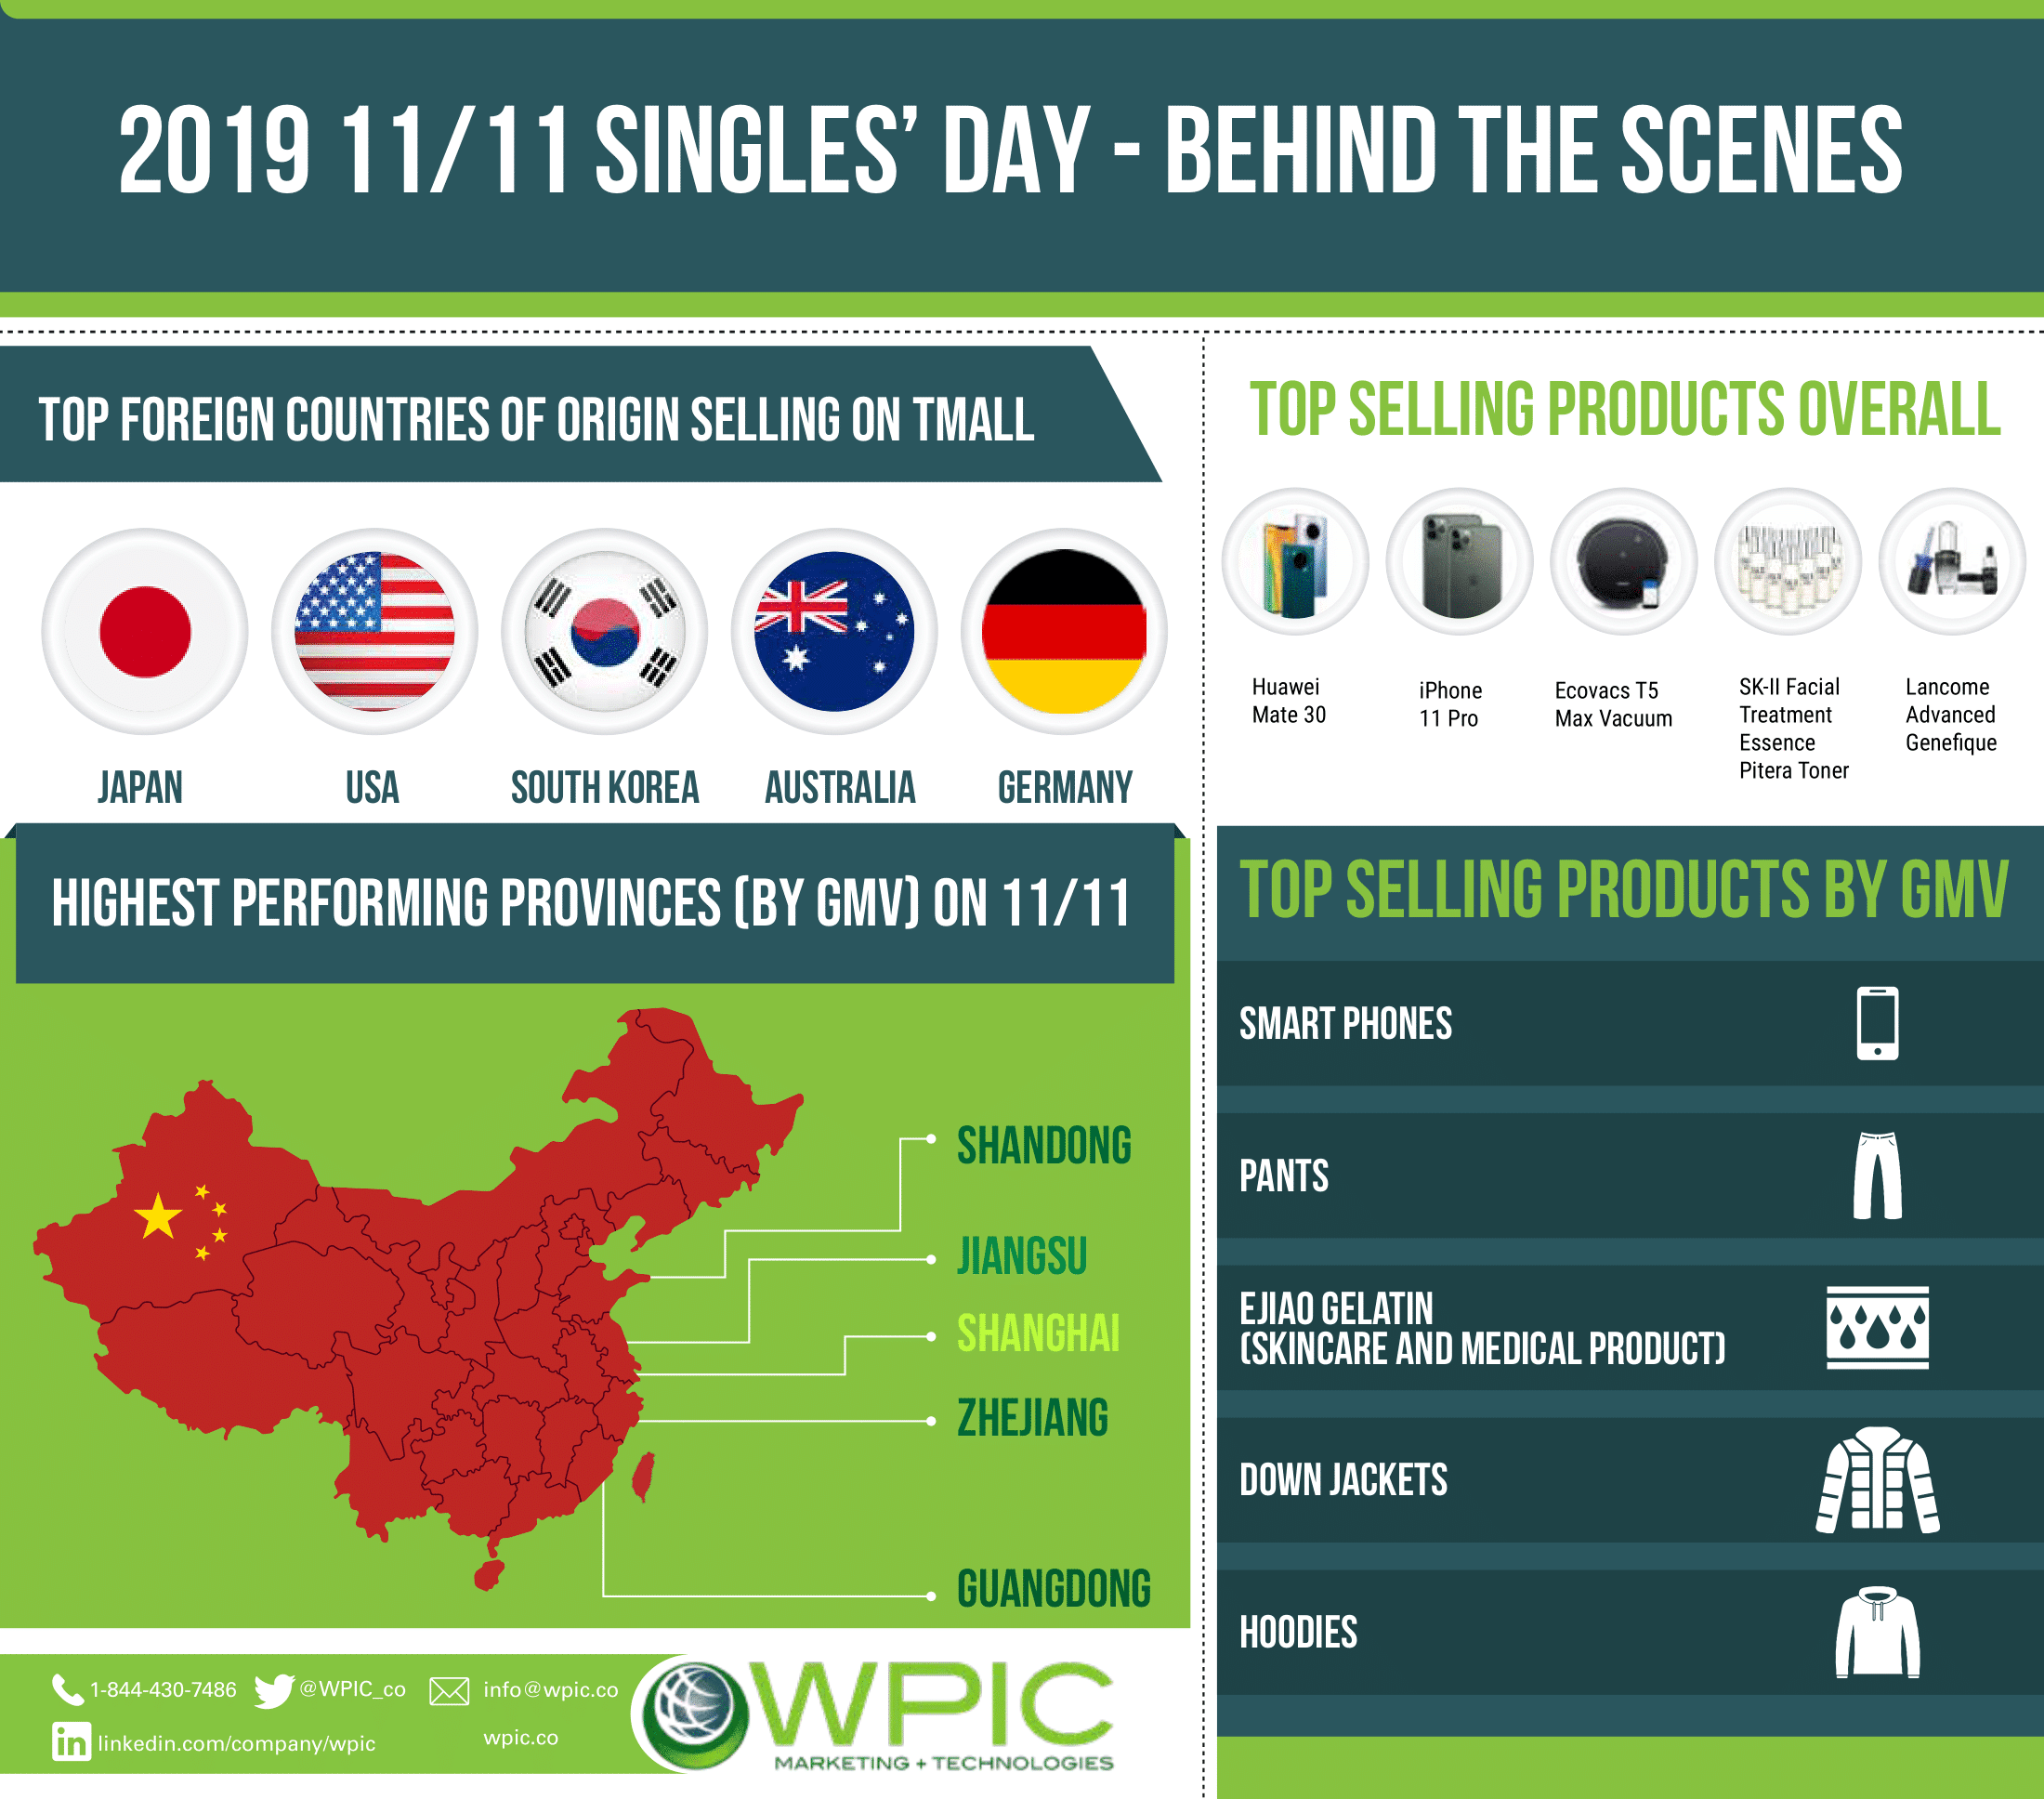 2019 11/11 Singles’ Day - Behind the scenes infographic